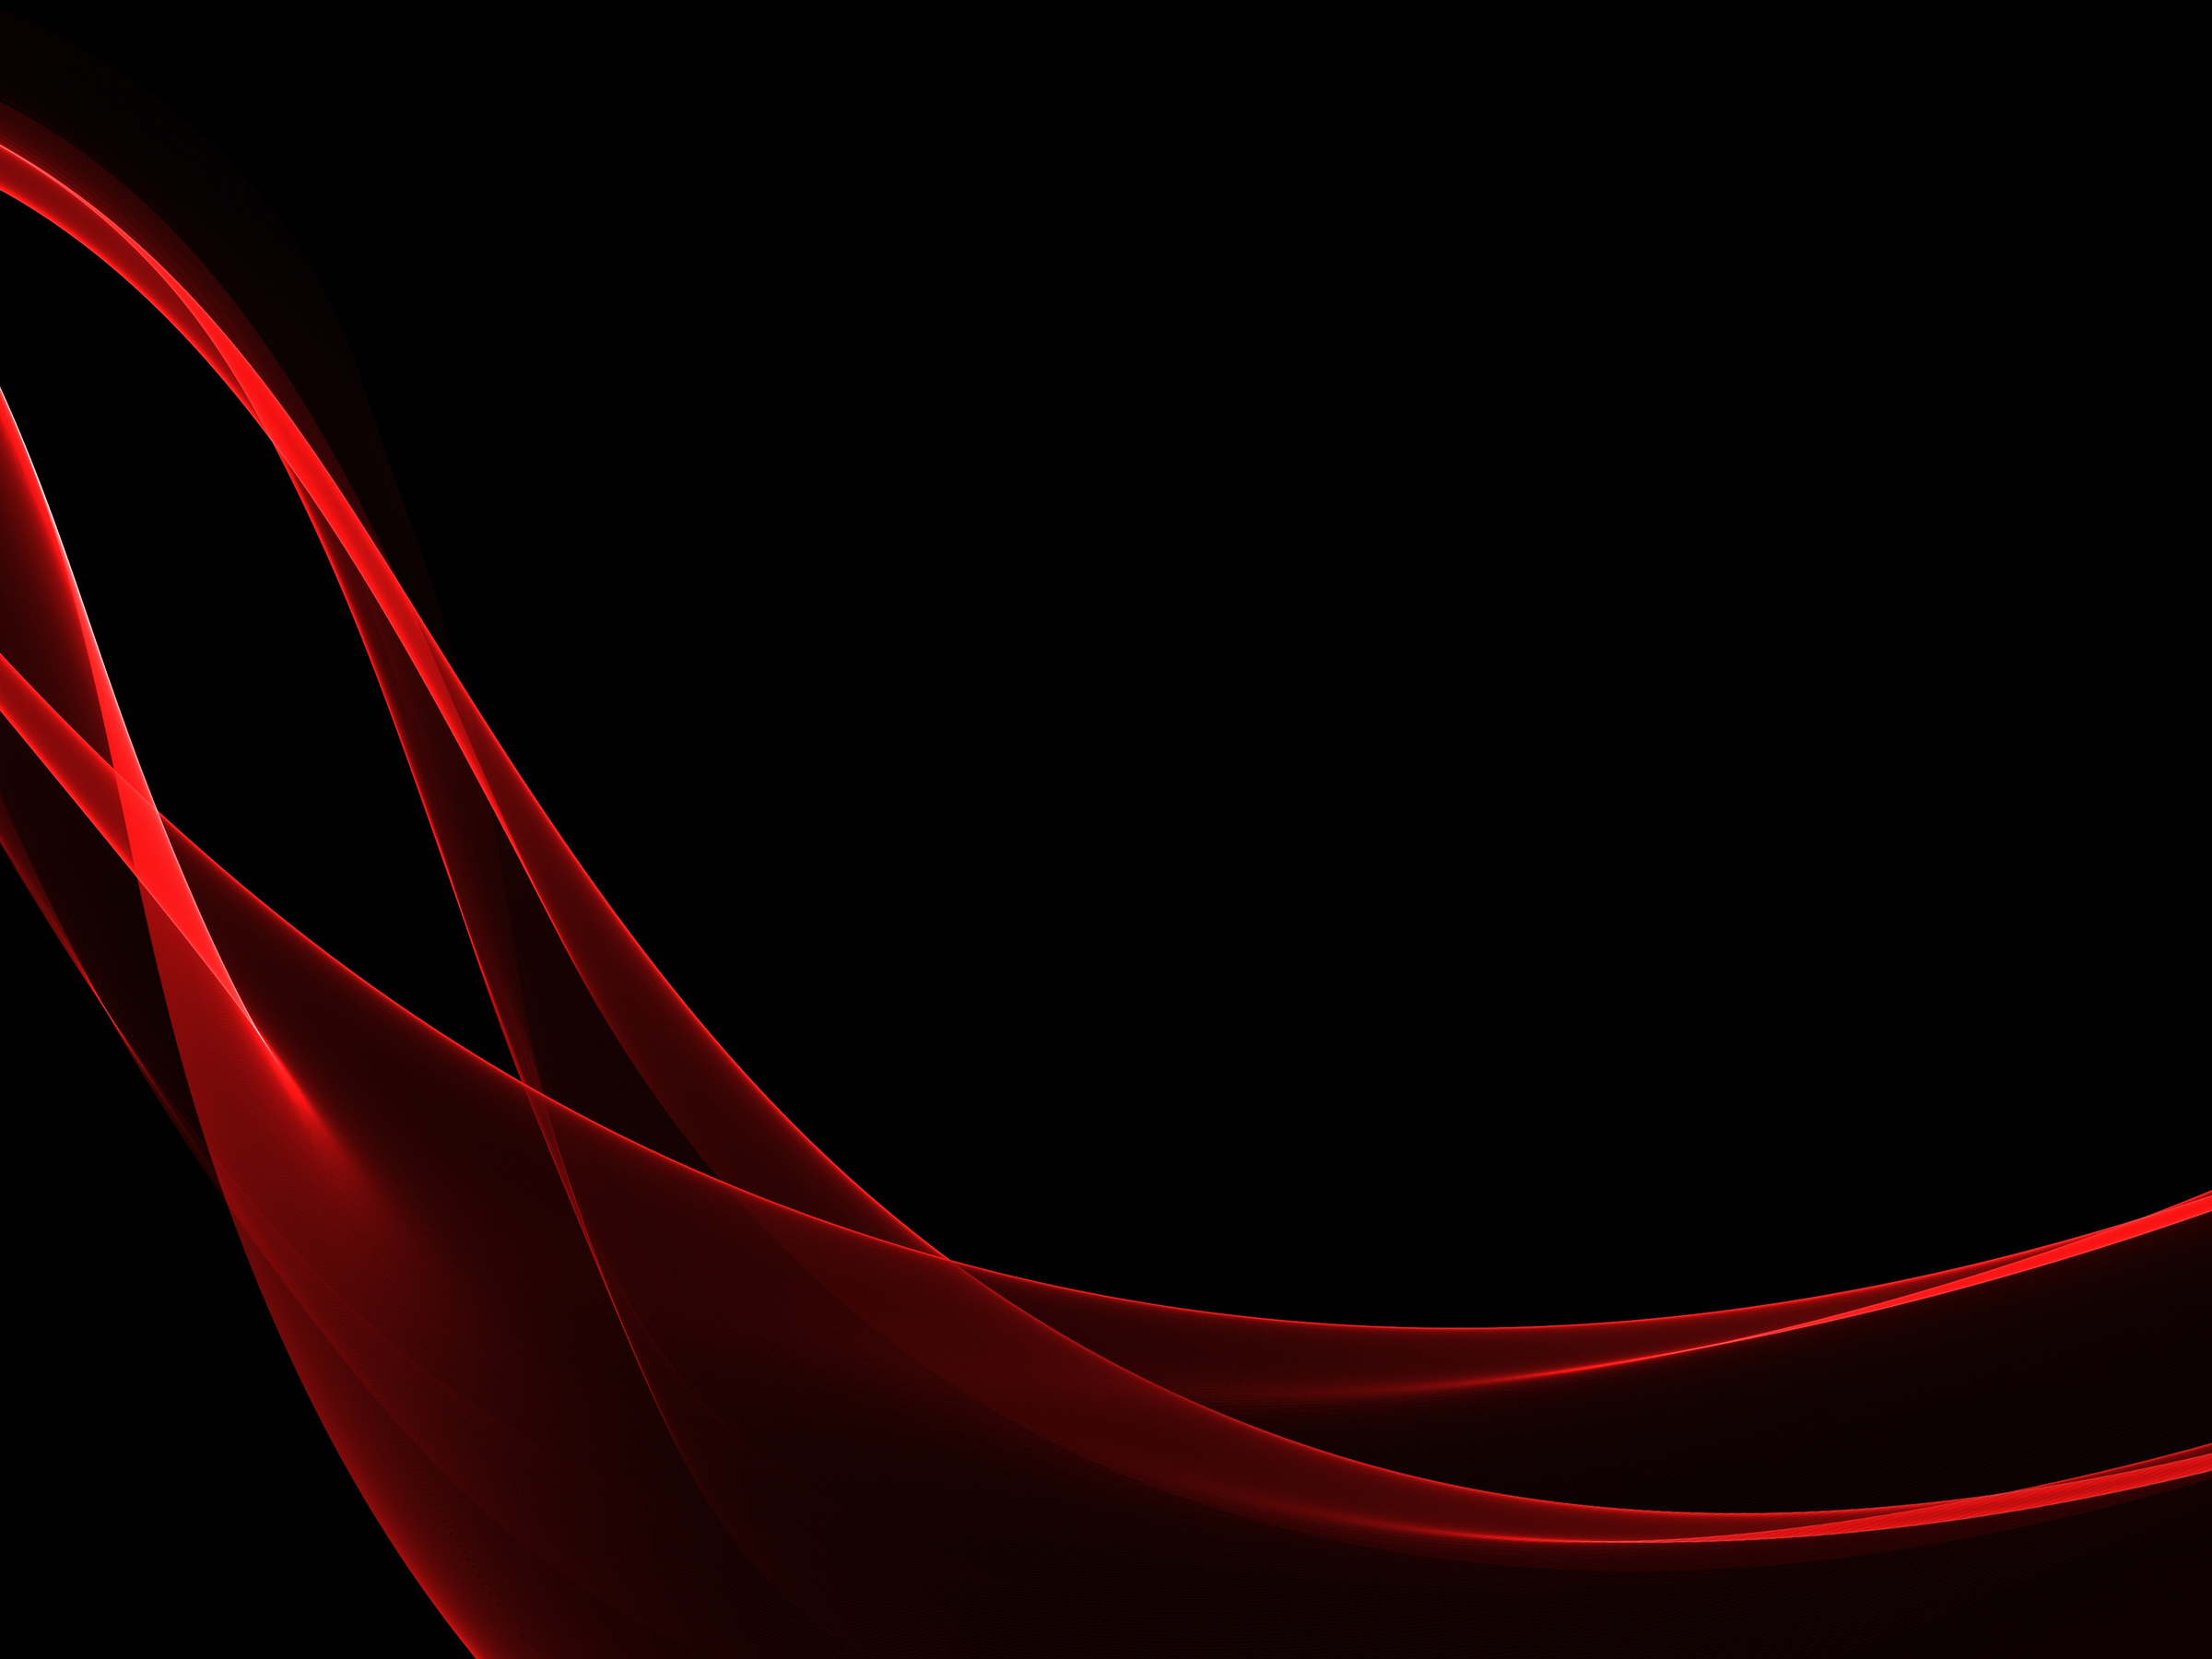 Abstract red wave and black background